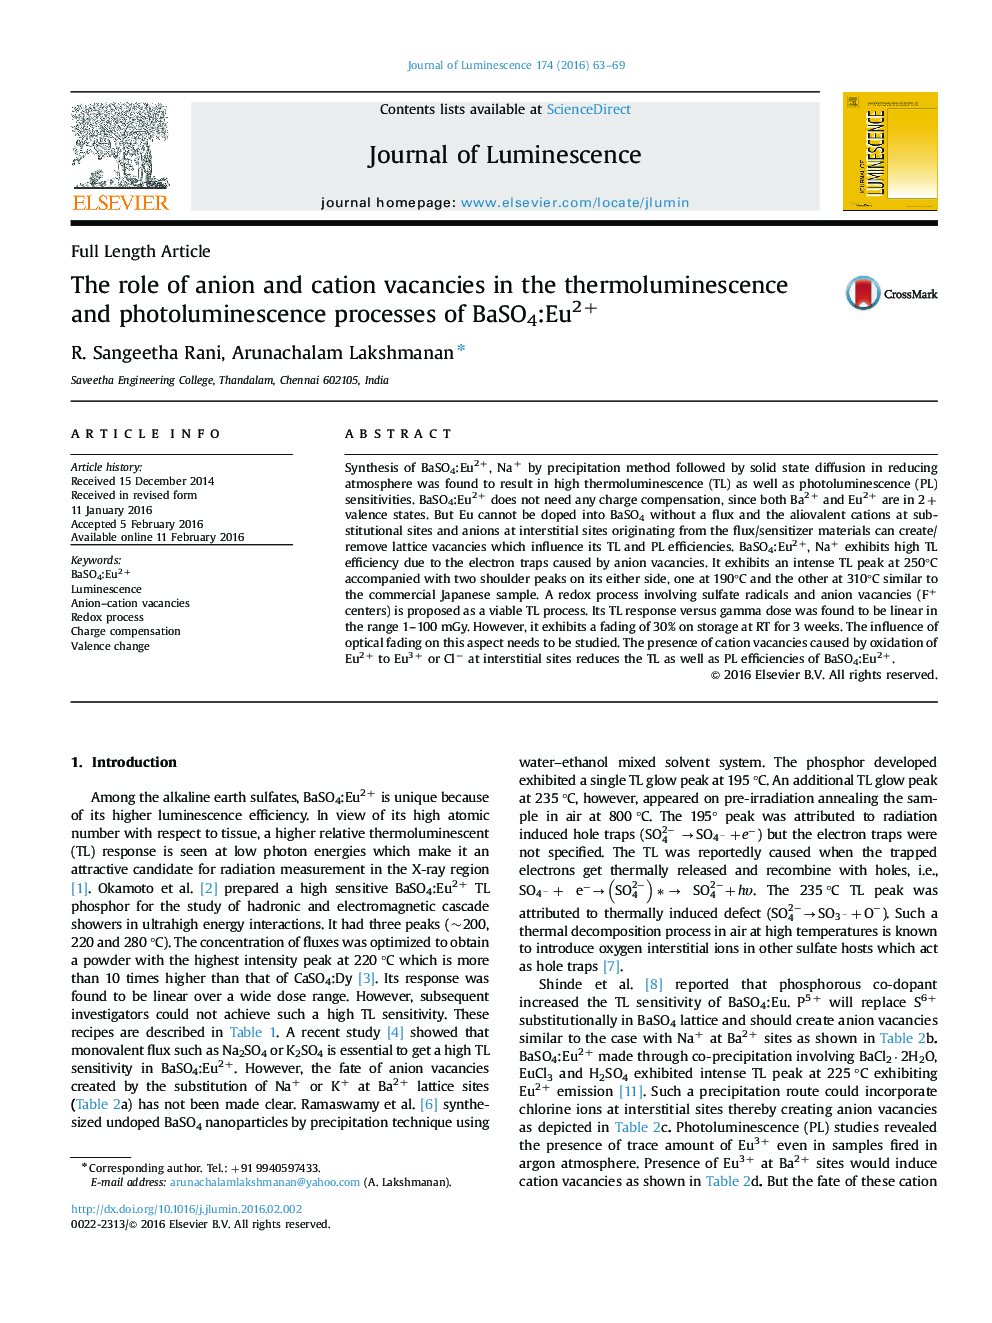 The role of anion and cation vacancies in the thermoluminescence and photoluminescence processes of BaSO4:Eu2+